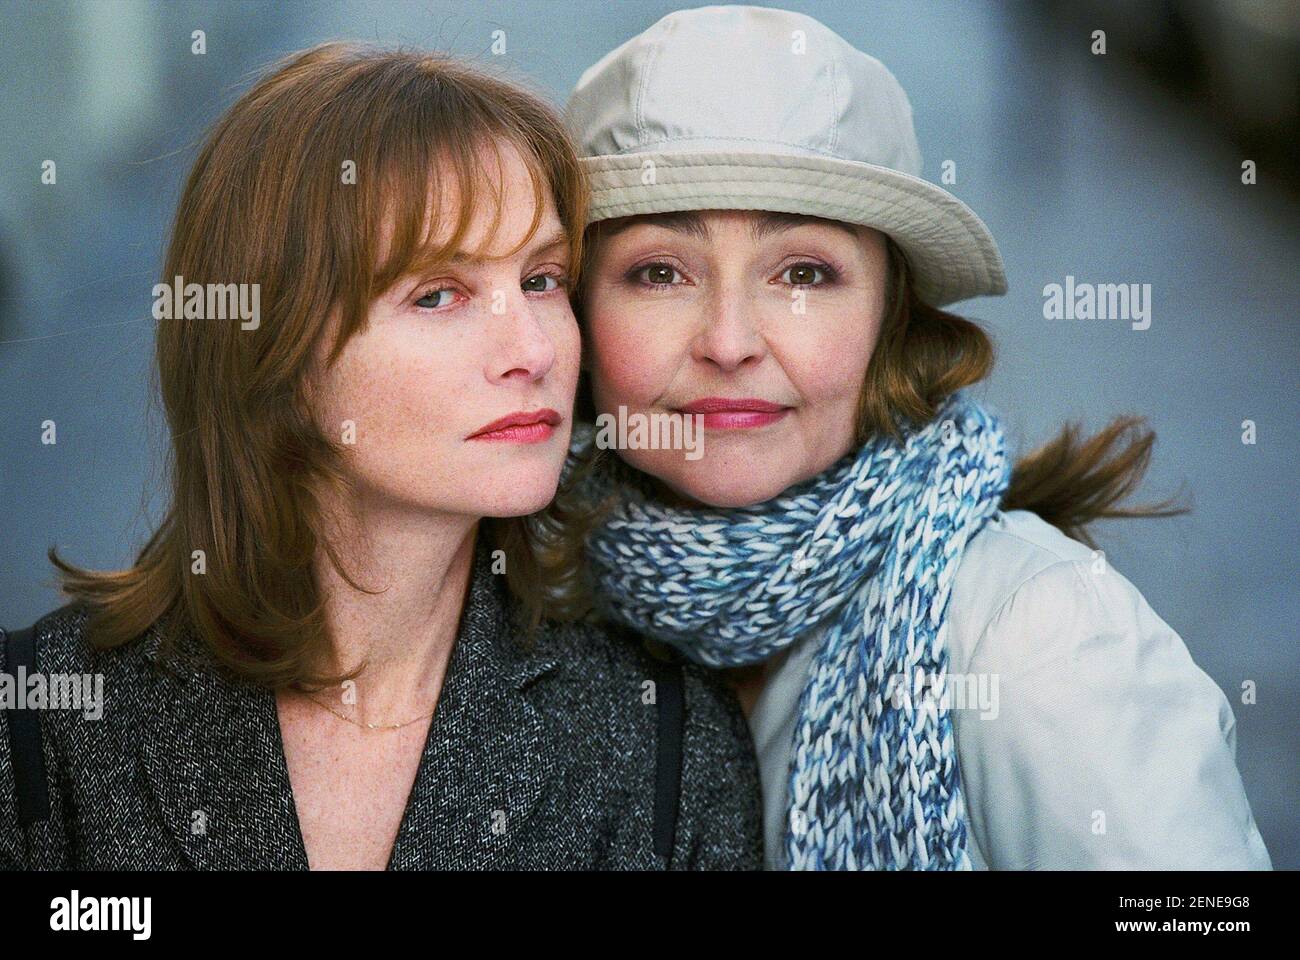 Les Soeurs fâchées Year : 2004 - France Isabelle huppert, Catherine Frot  Director : Alexandra Leclère Stock Photo